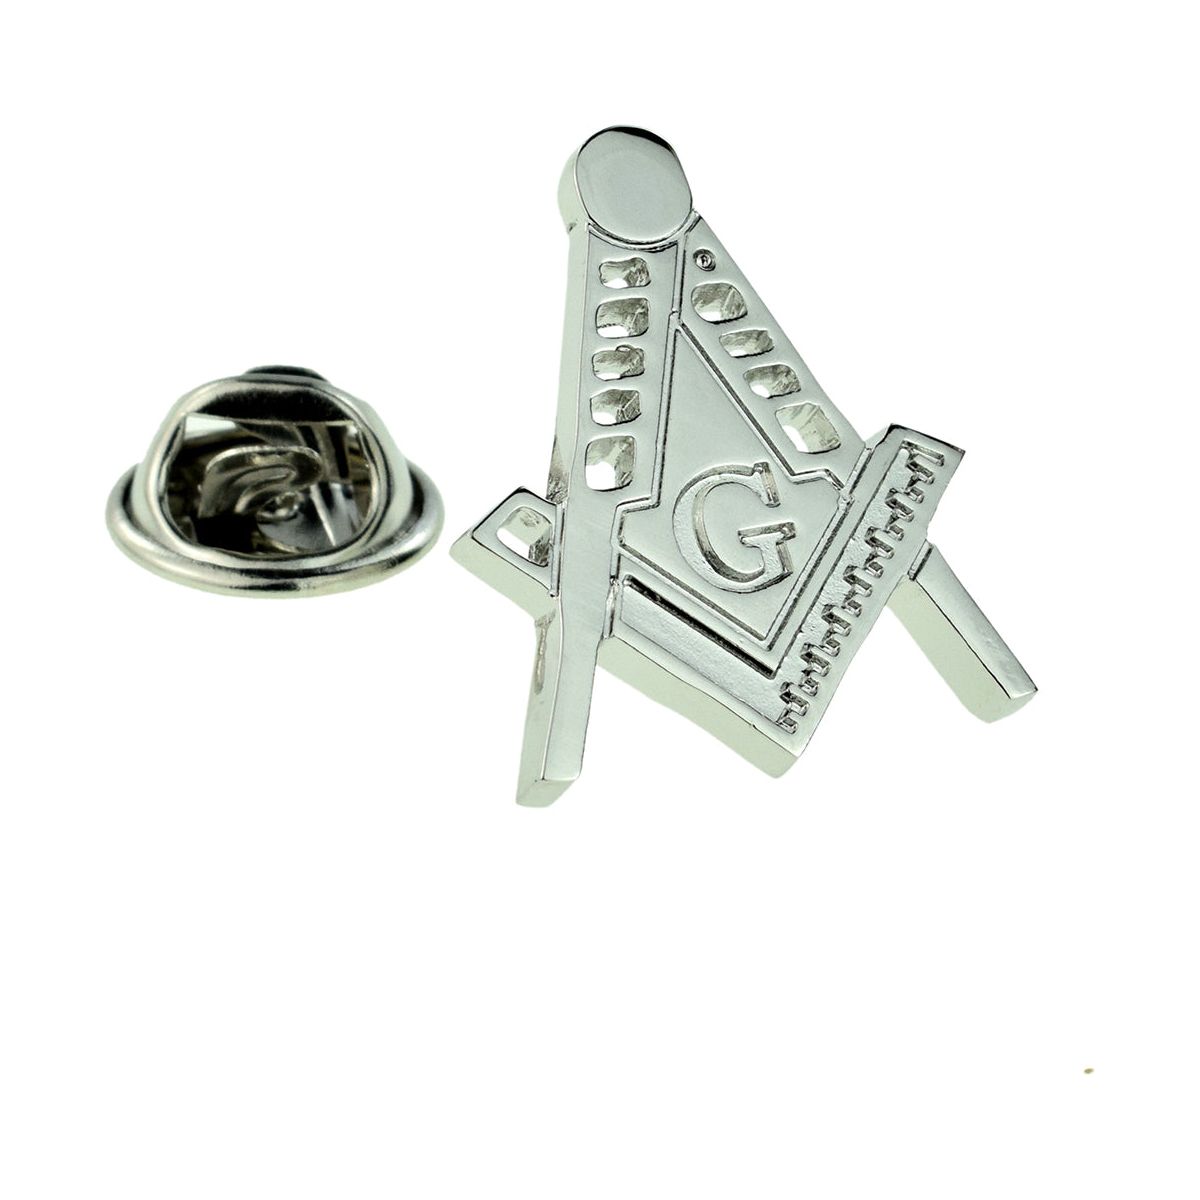 Masonic Compass & Square with G Lapel Pin Badge - Ashton and Finch